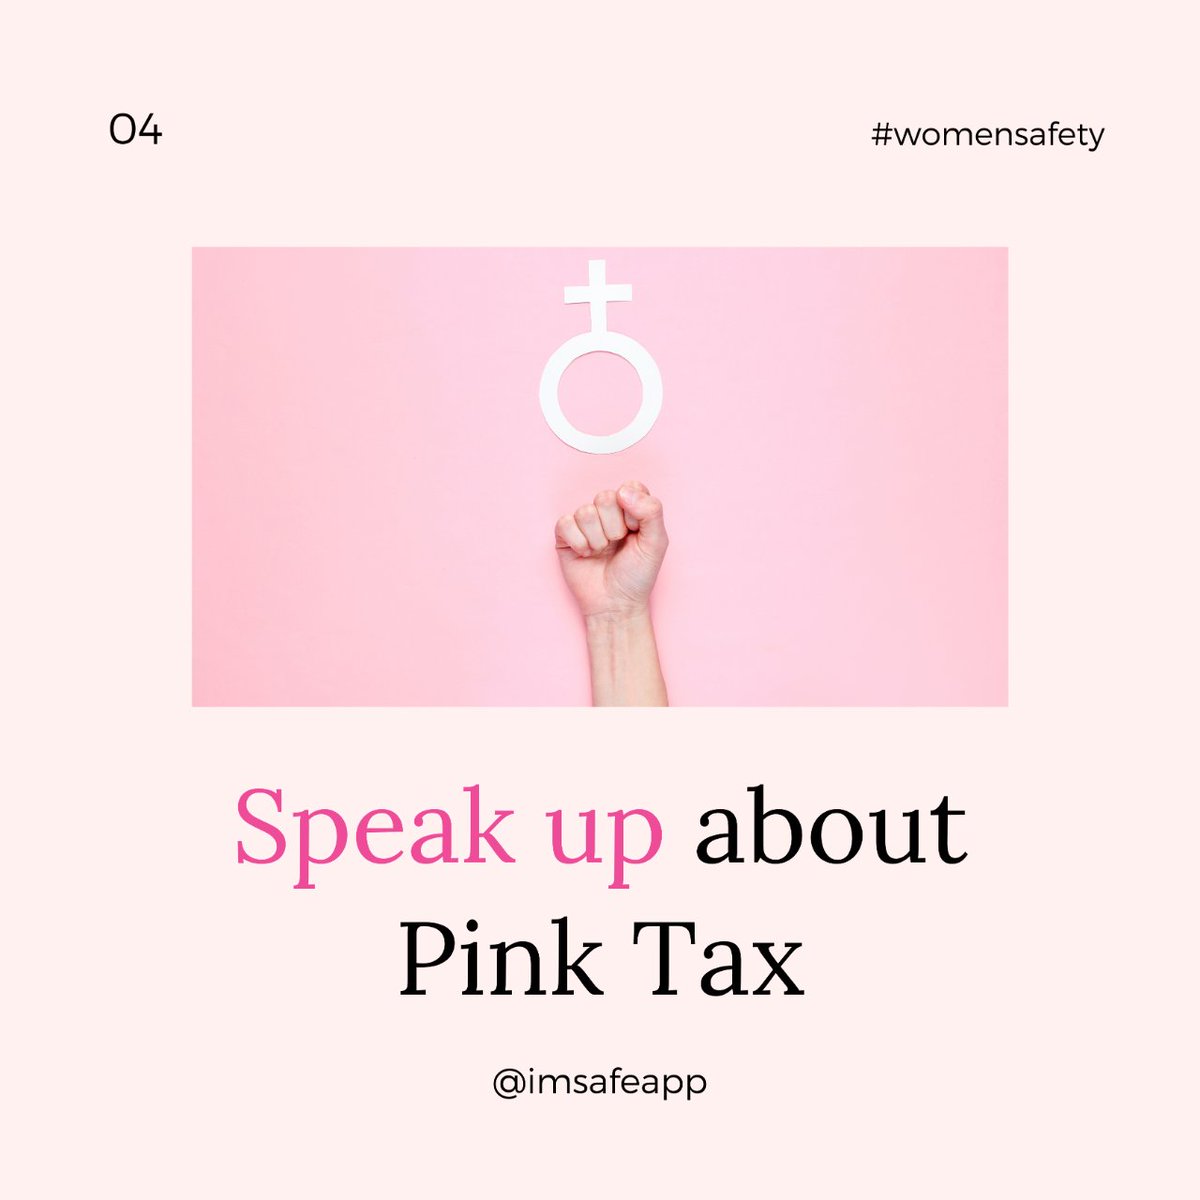 Equal rights are not just a dream, they're a reality we're creating together. Let's keep pushing for gender equality!

#genderequality #equalrights #feminism #girlpower #pinktax #pink #tax  #womenceomindset #bossbabes #sheboss #feminism #womensafety #women #feminist #strongwomen